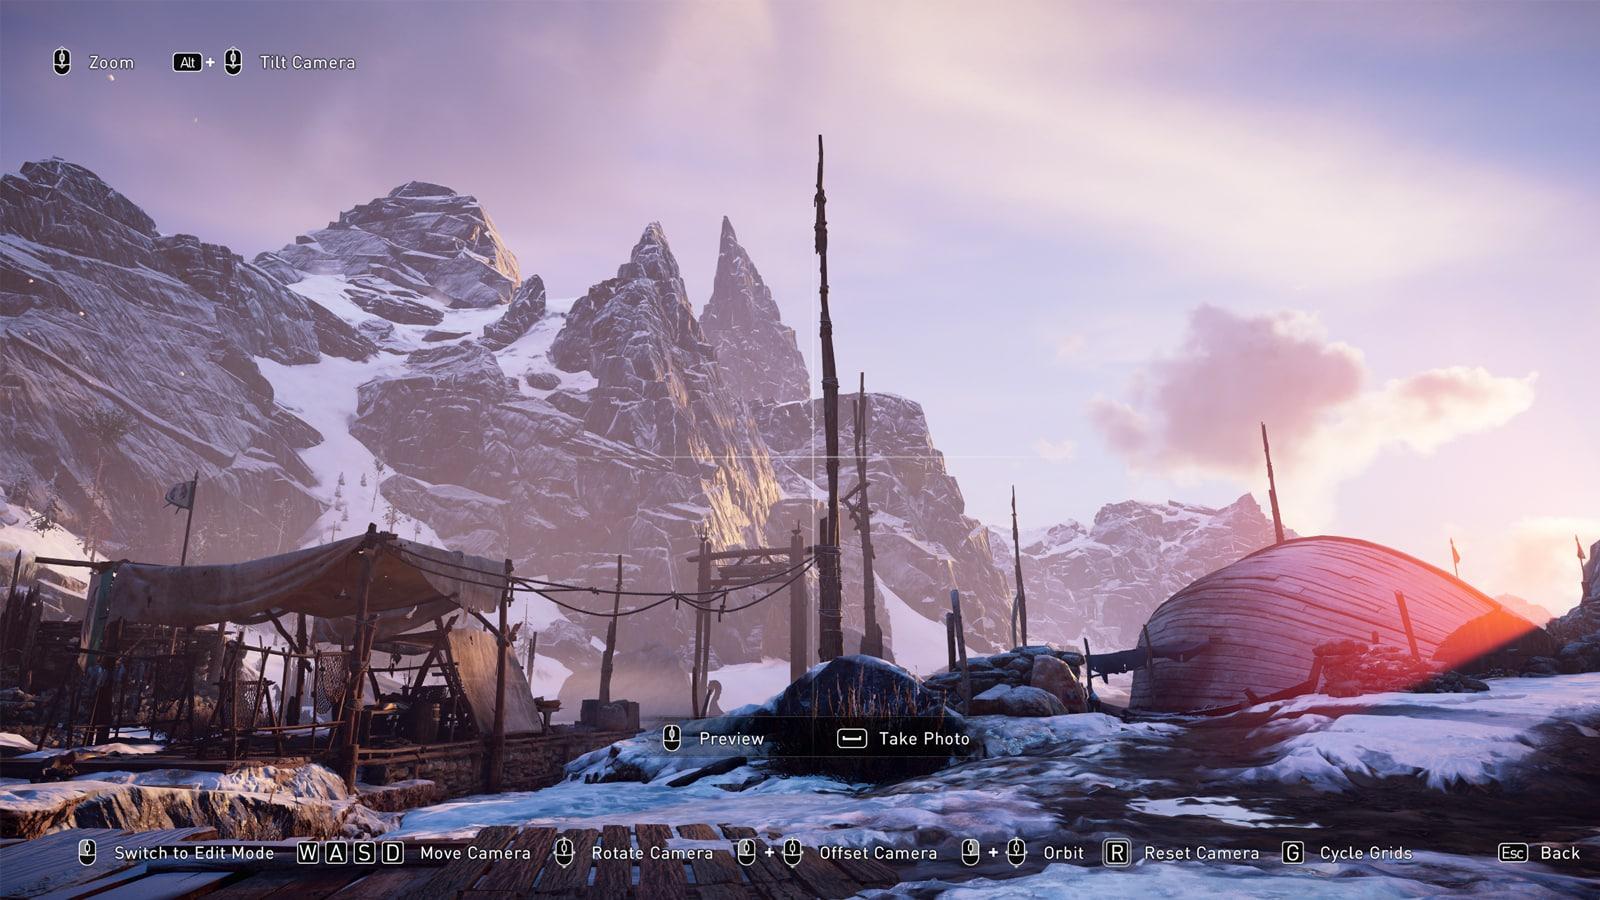 Screenshot of Valhalla's photo mode option showing the UI and a beautiful snowy mountain alongside a settlement.